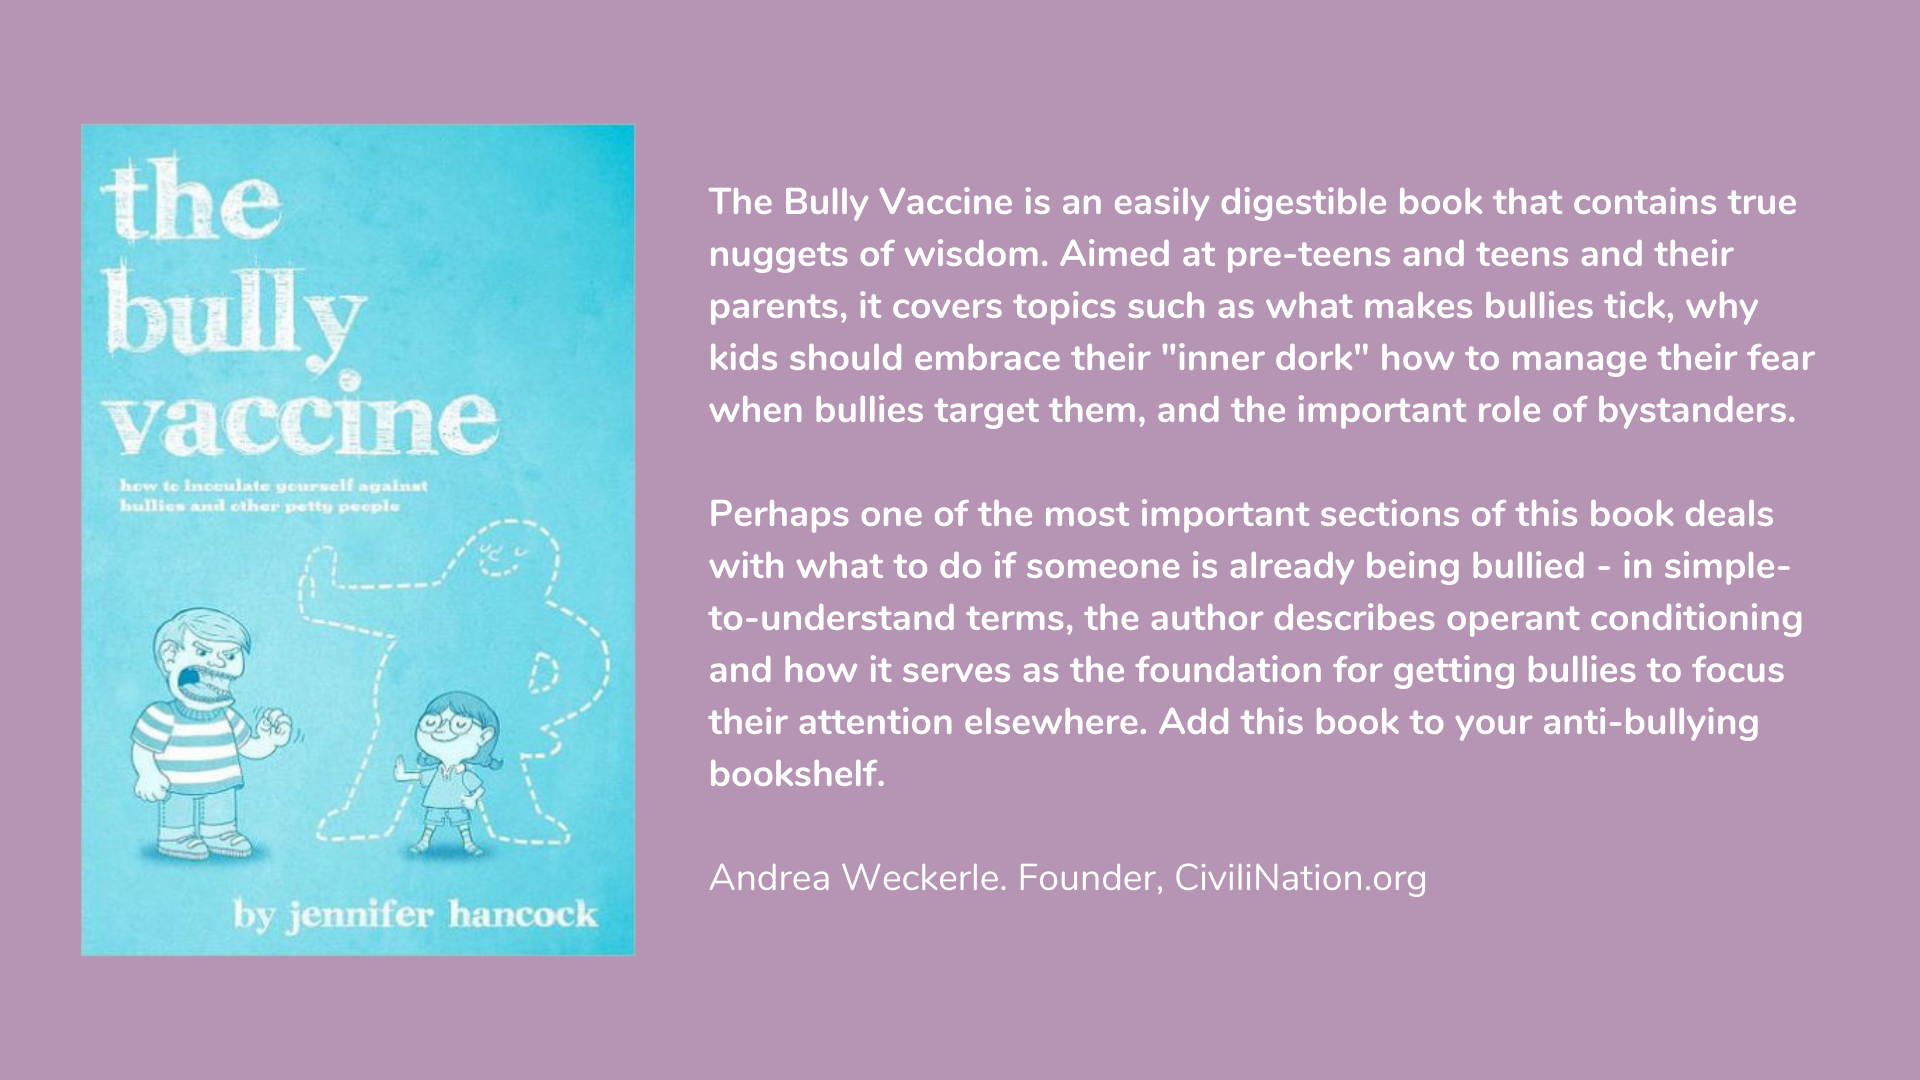 The Bully Vaccine: How to Inoculate Yourself Against Obnoxious People